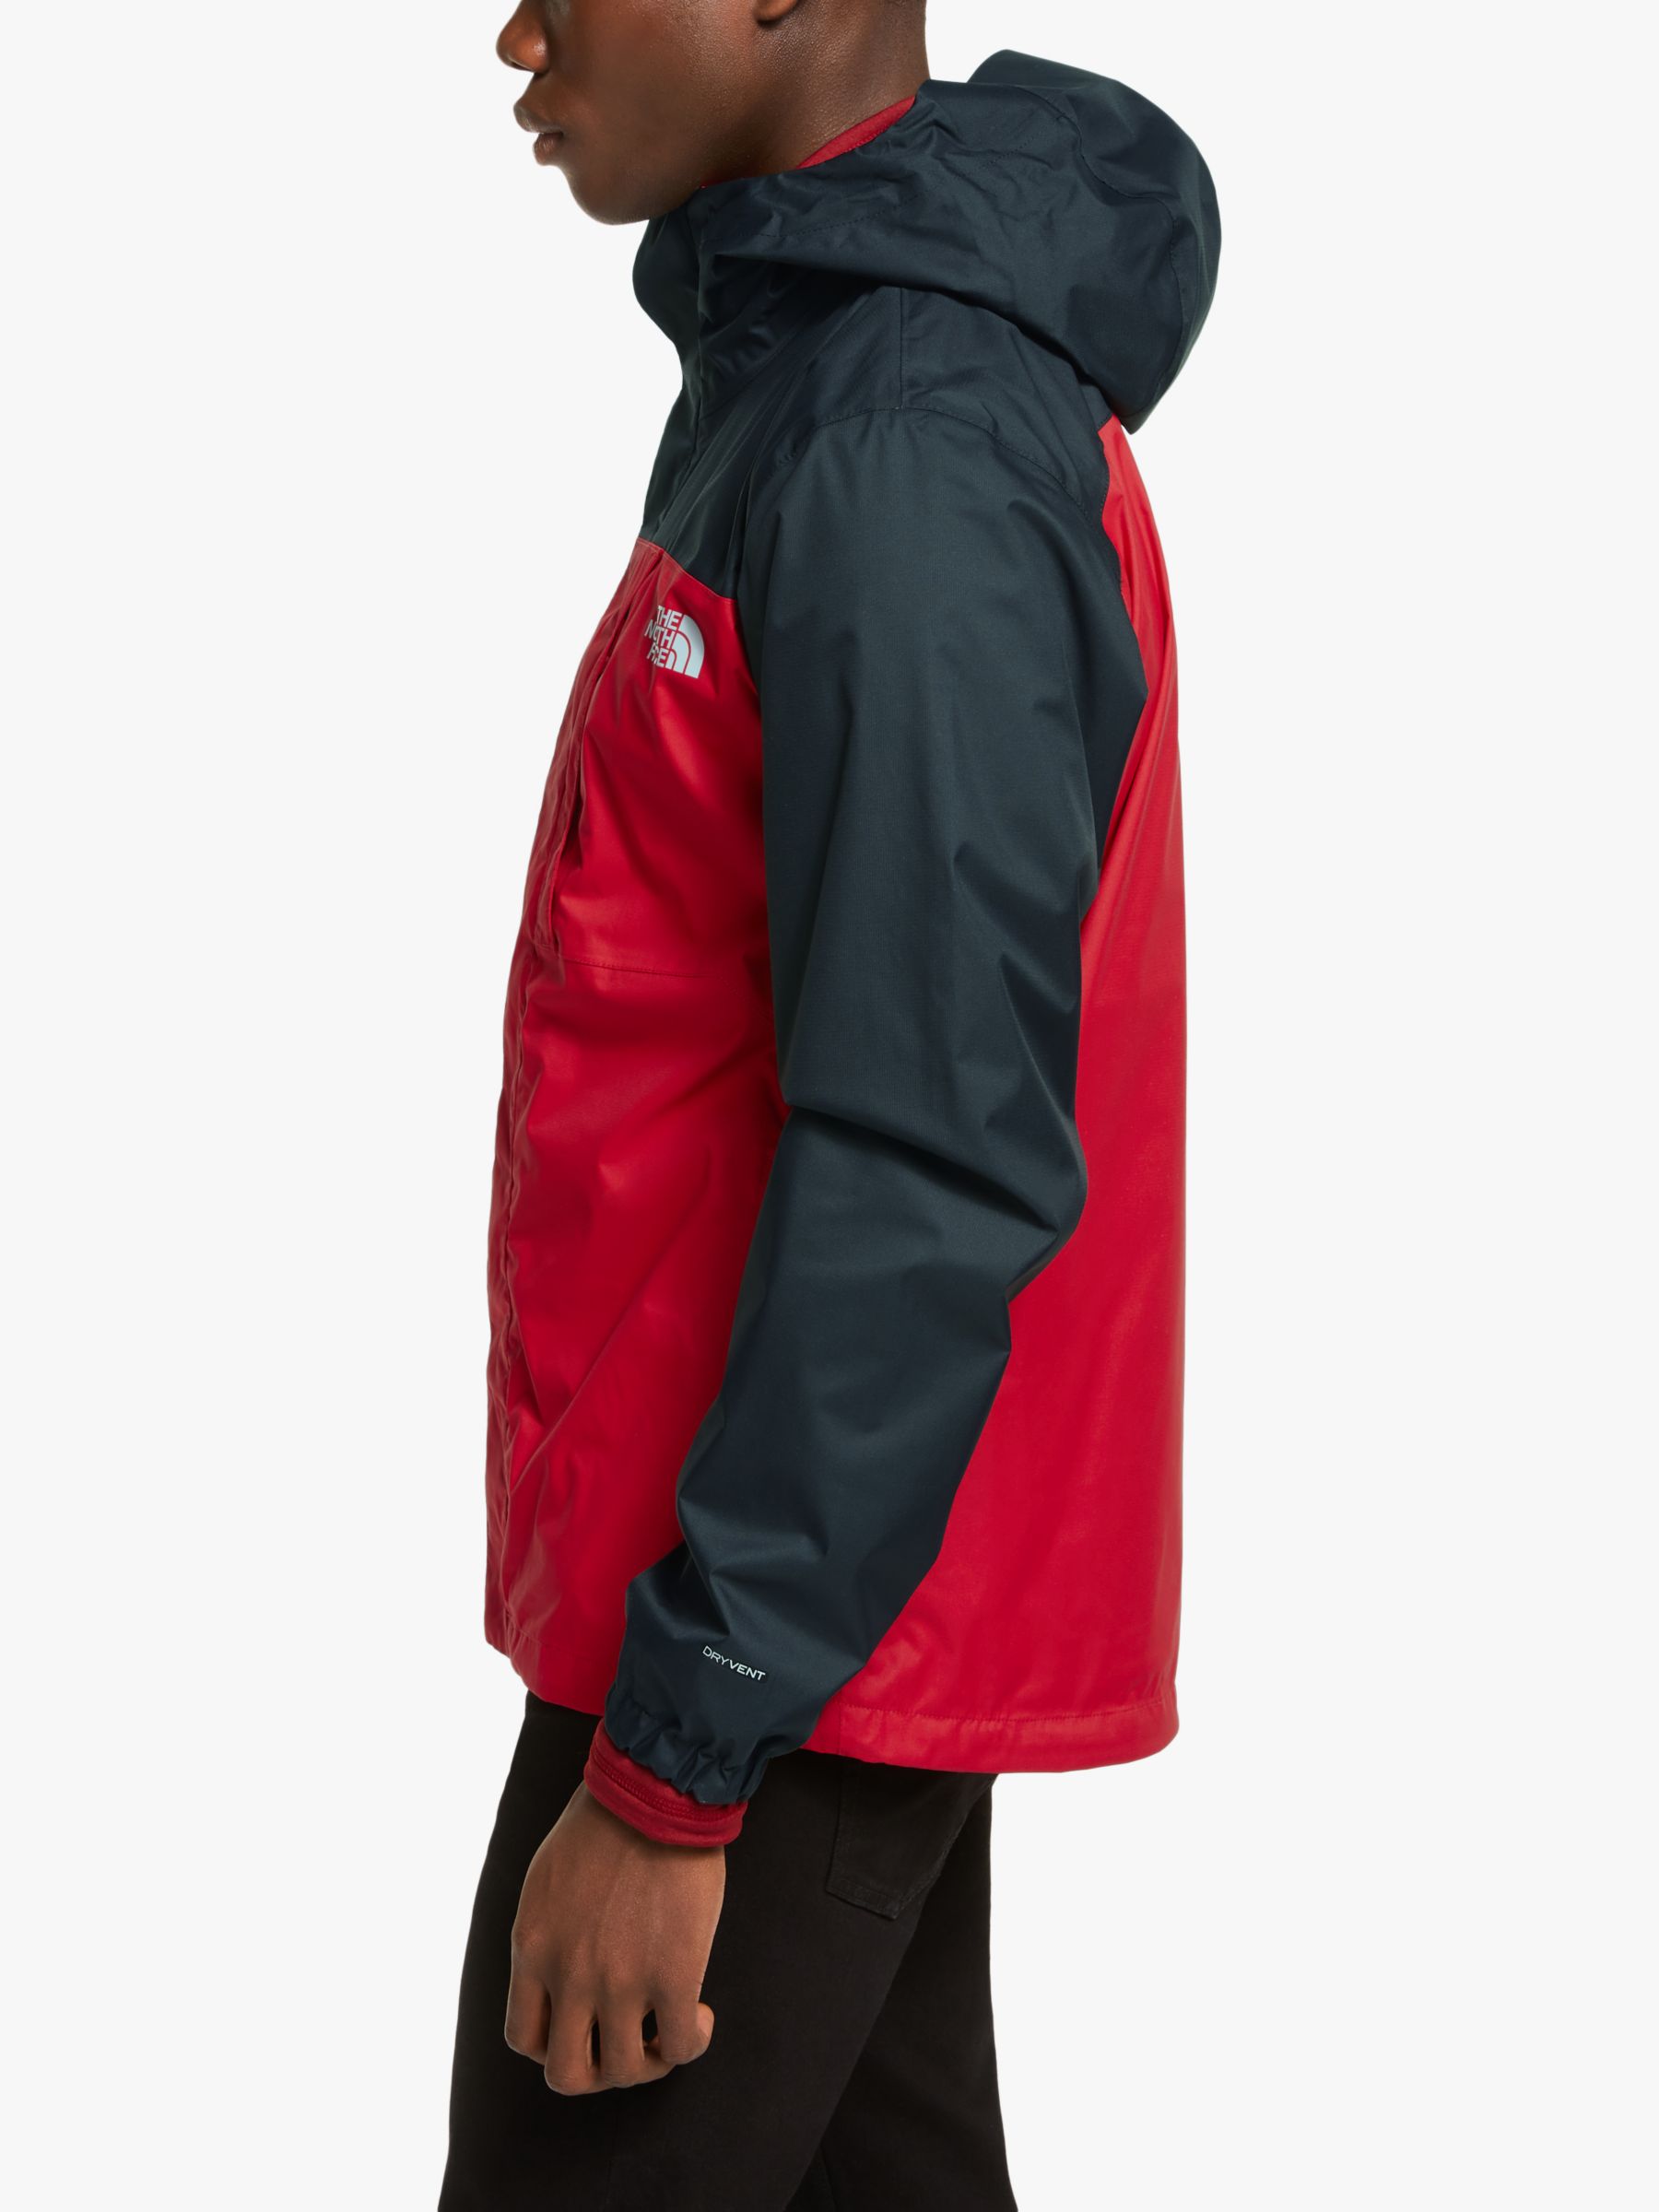 mens red and black north face jacket